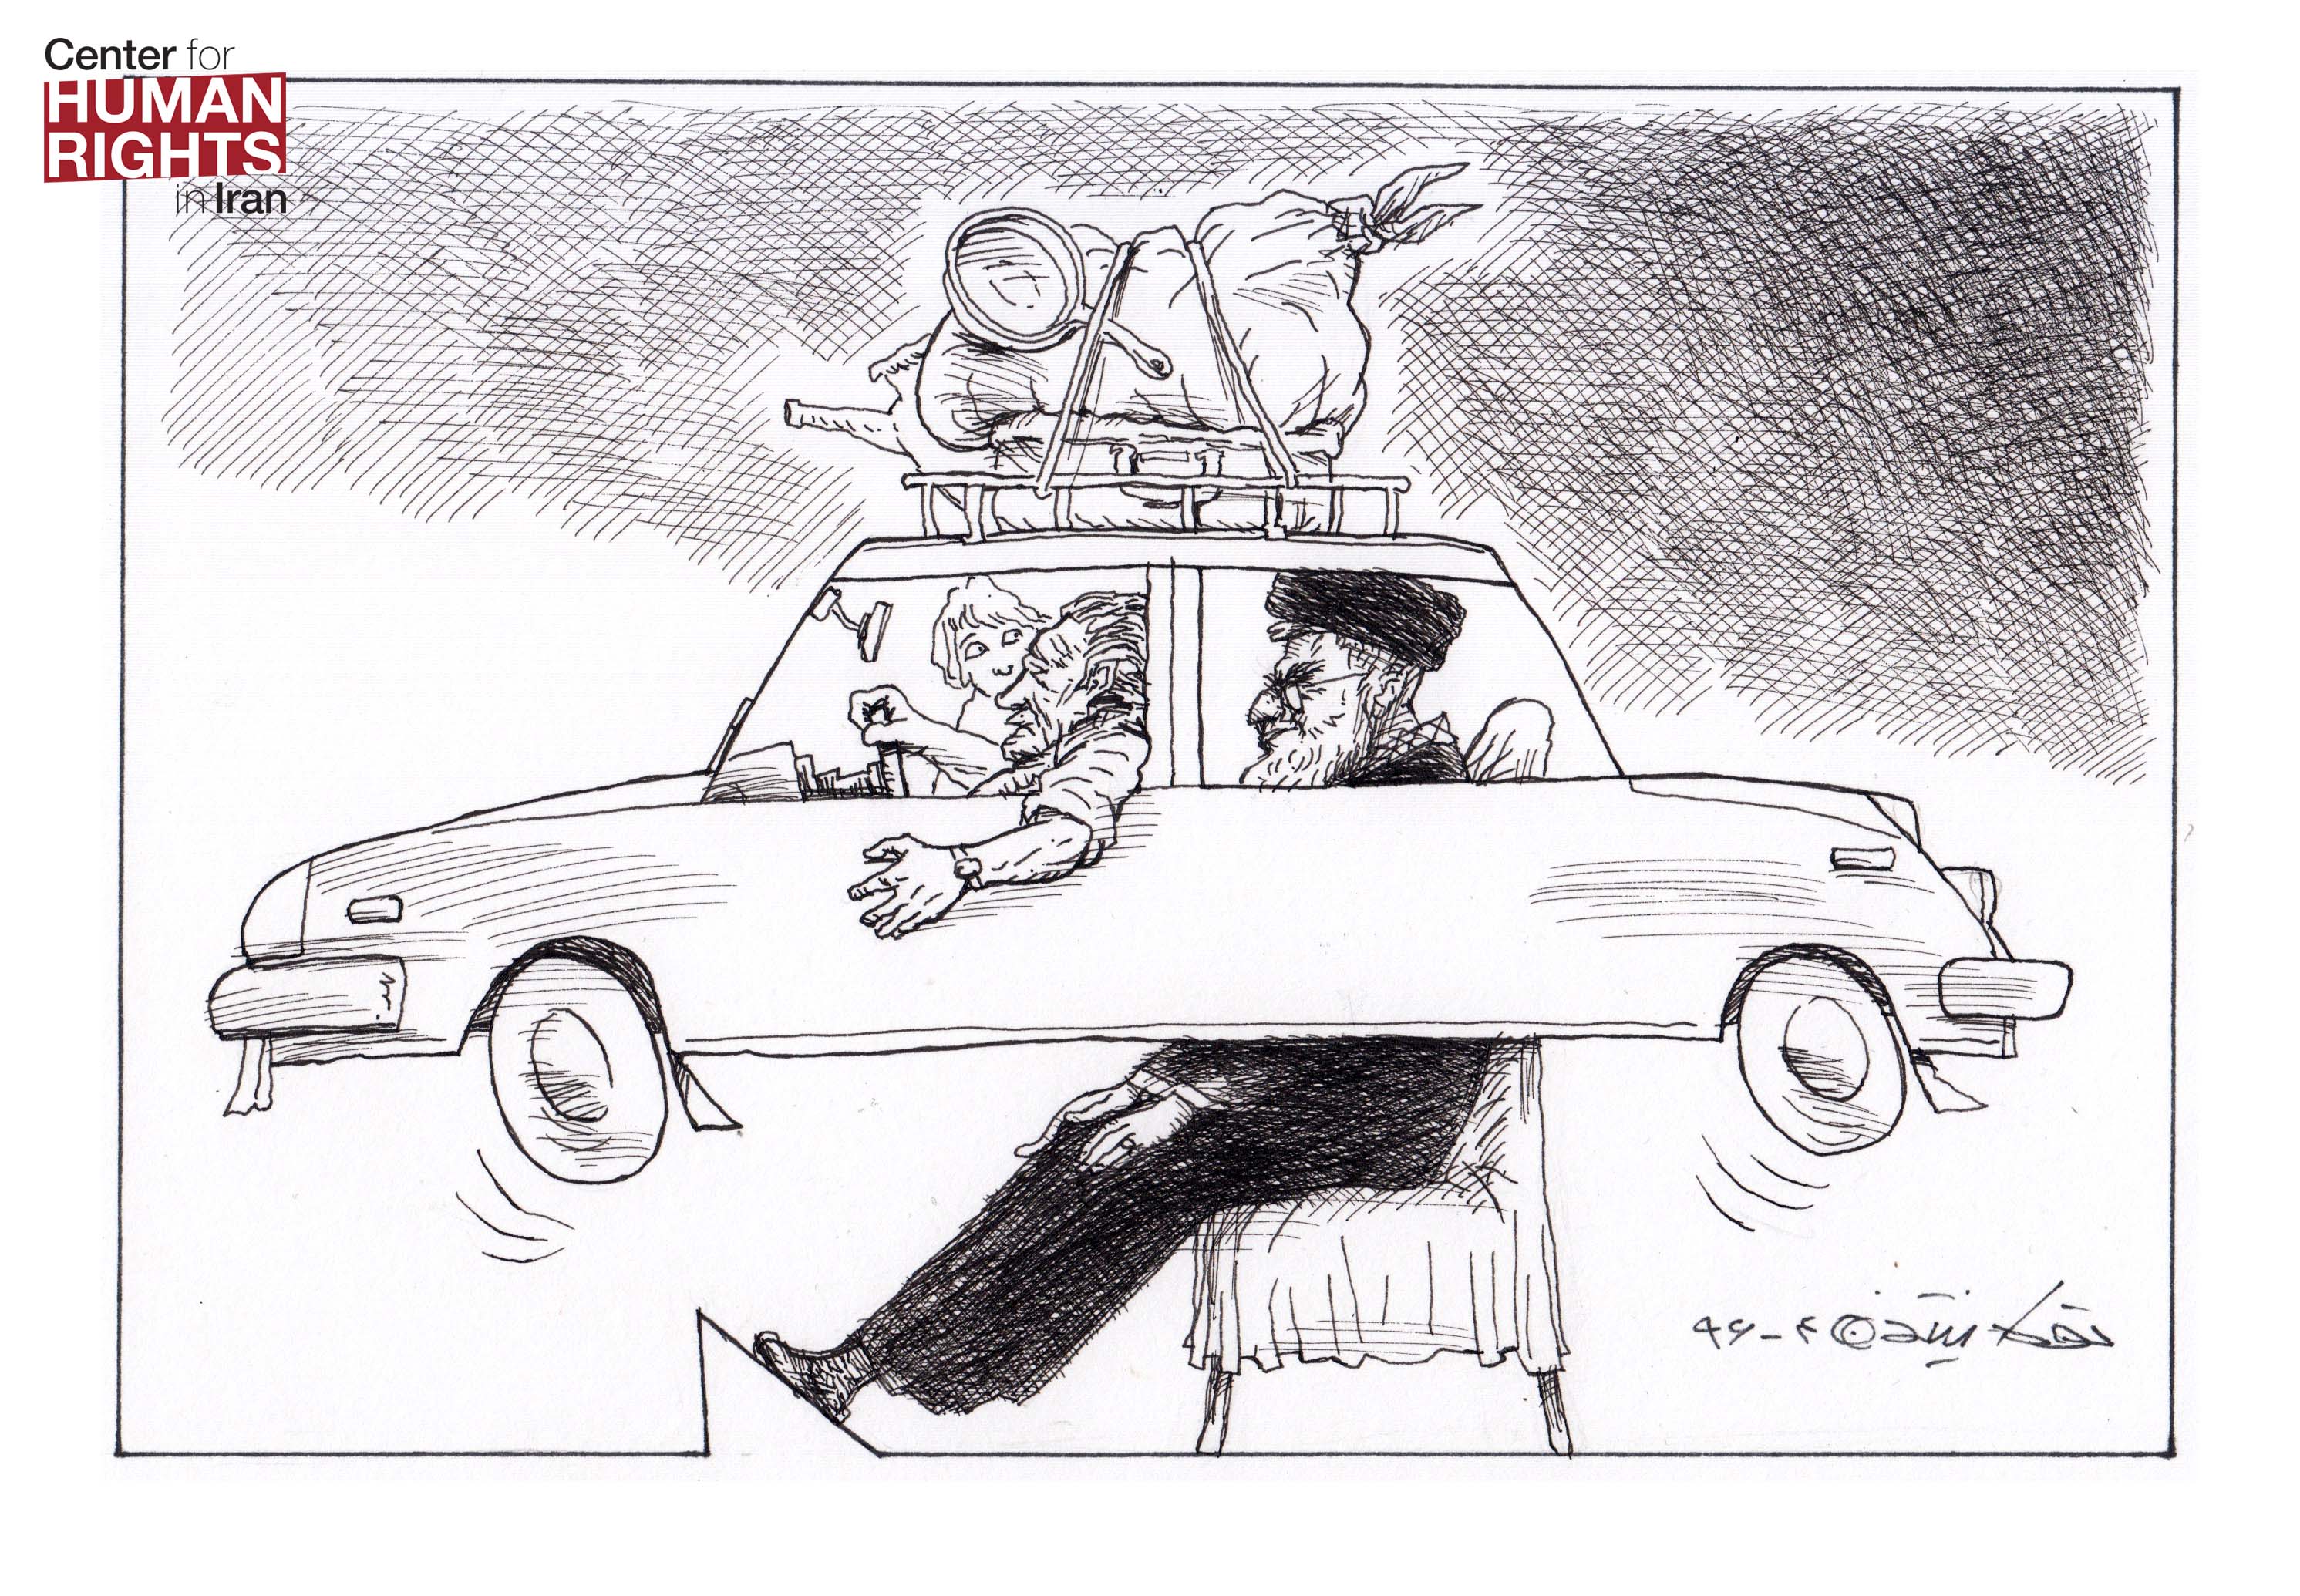 Cartoonist Touka Neyastani depicts the debate over whether women should be forced to wear hijabs in cars, which legal experts argue are private spaces and therefore not subject to Iran's mandatory hijab law. https://iranhumanrights.org/2017/07/contradictory-laws-exasperate-debate-over-iranian-womens-observance-of-hijab-in-cars/